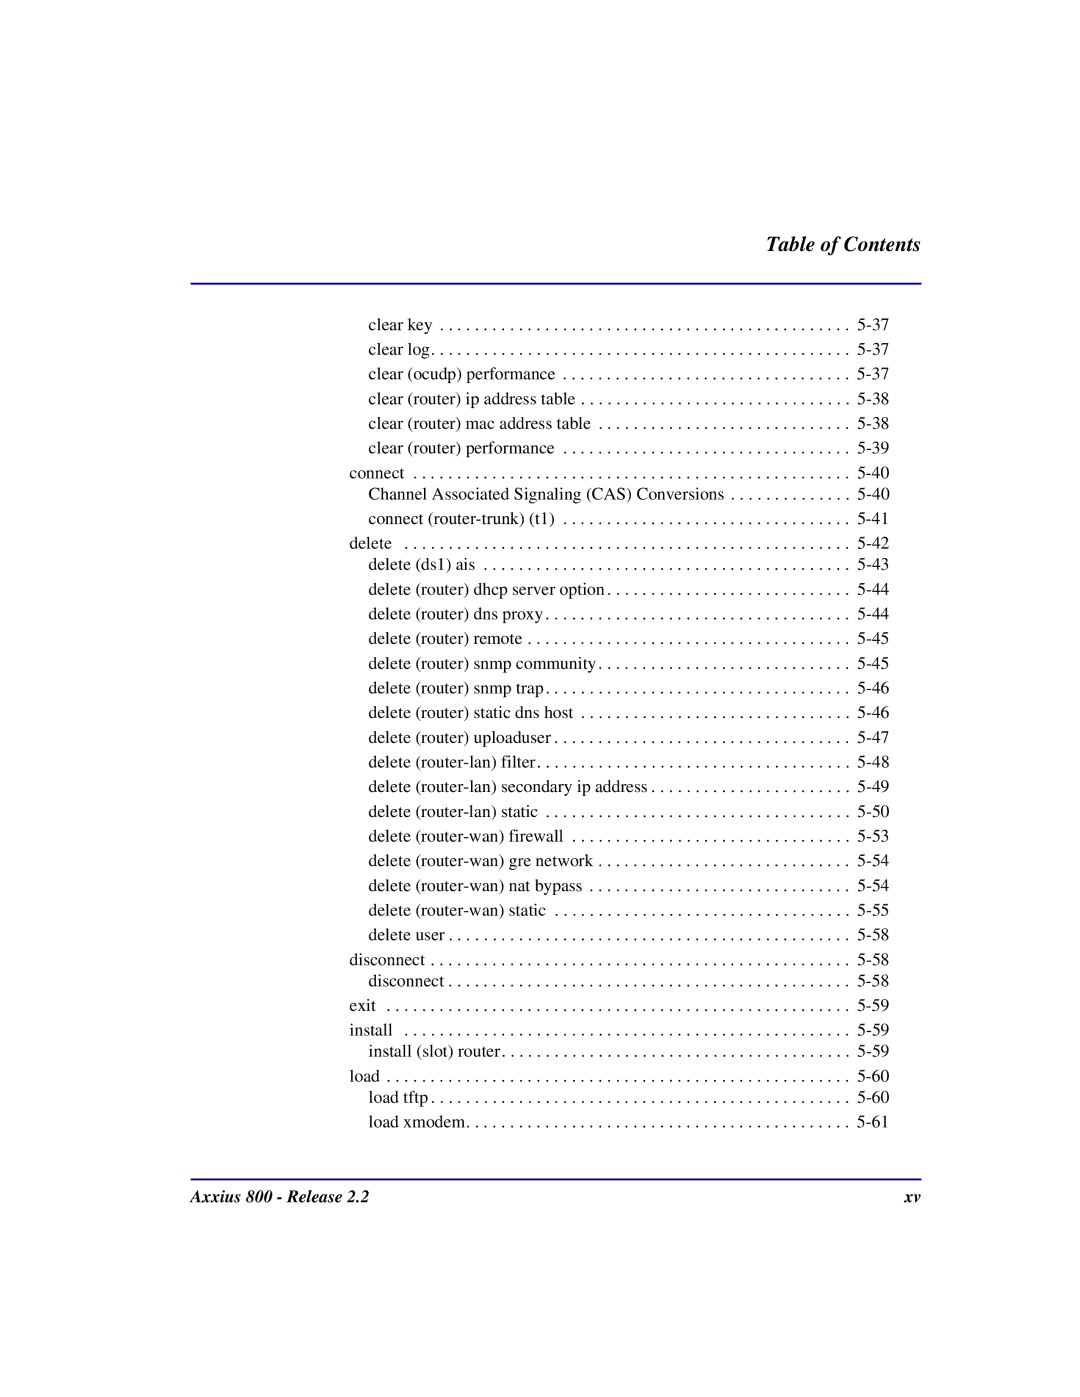 Carrier Access Axxius 800 user manual Table of Contents 